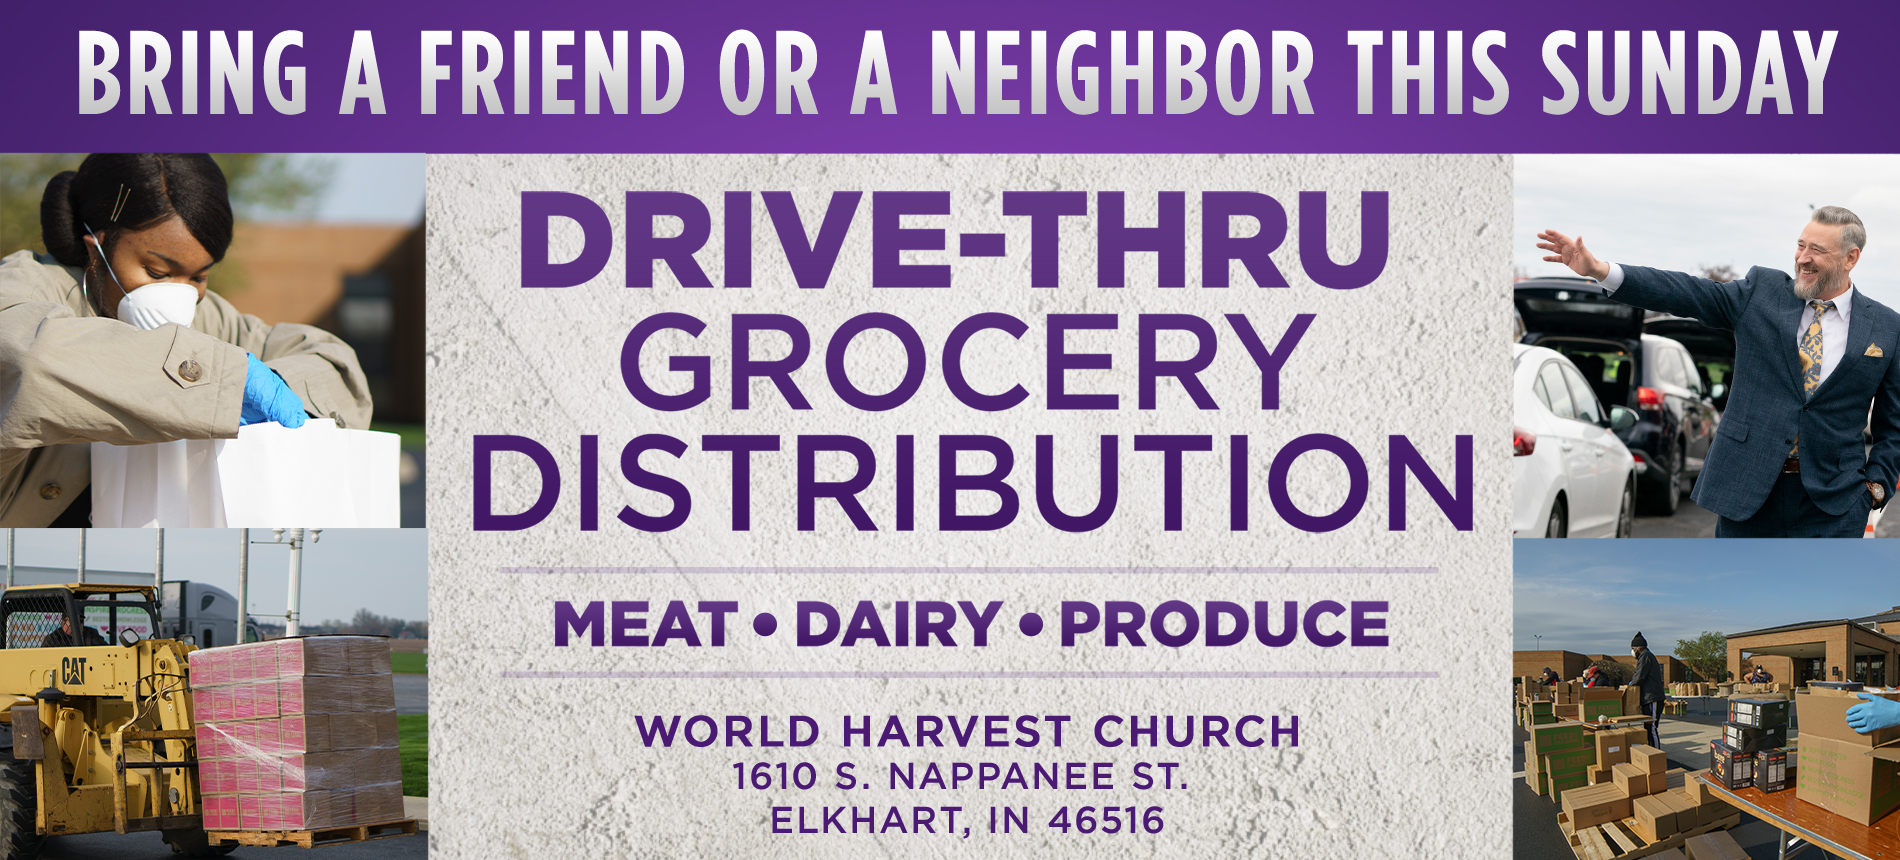 Drive-Thru Grocery Distribution Meat, Dairy, Produce World Harvest Church 1610 S. Nappanee St. Elkhart, IN 46516